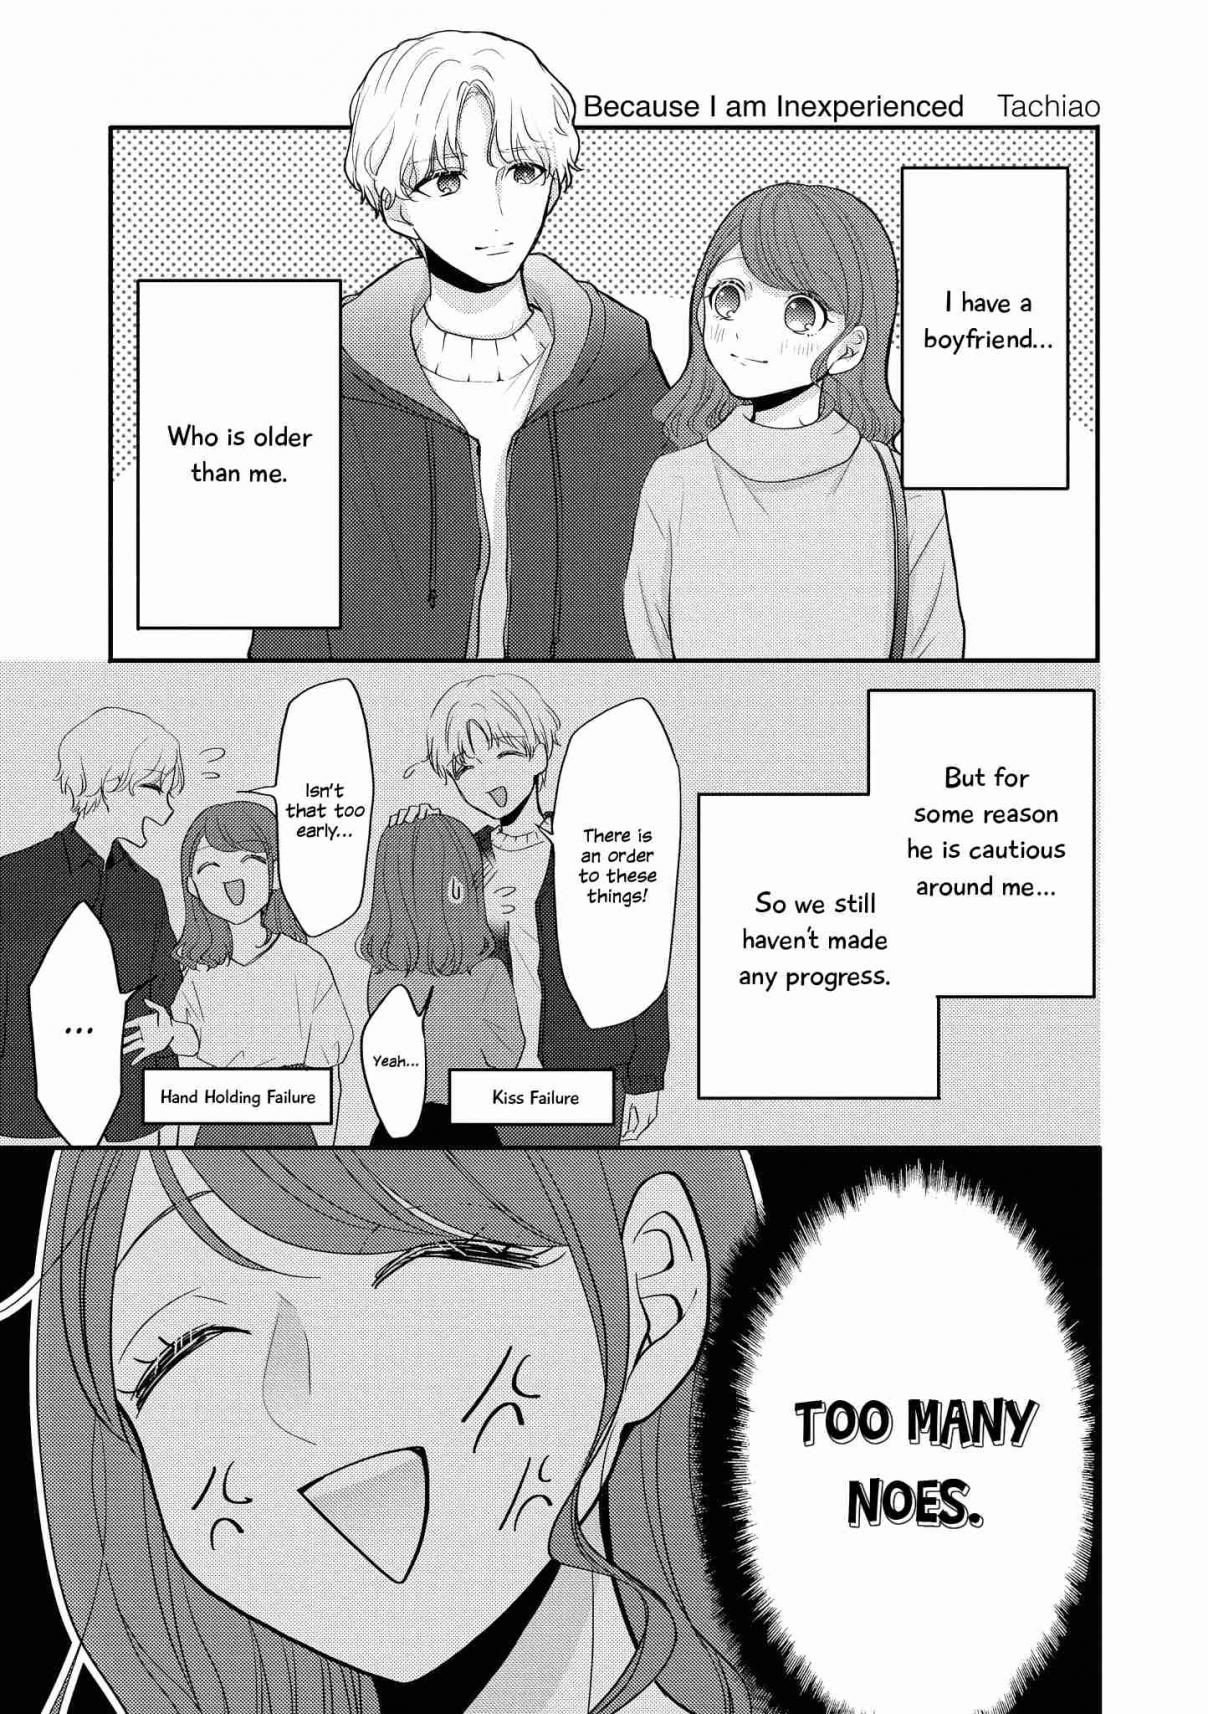 “It’s Too Precious and Hard to Read!!” 4P Short Stories Vol. 2 Ch. 45 Because I am Inexperienced [by Tachiaoi]